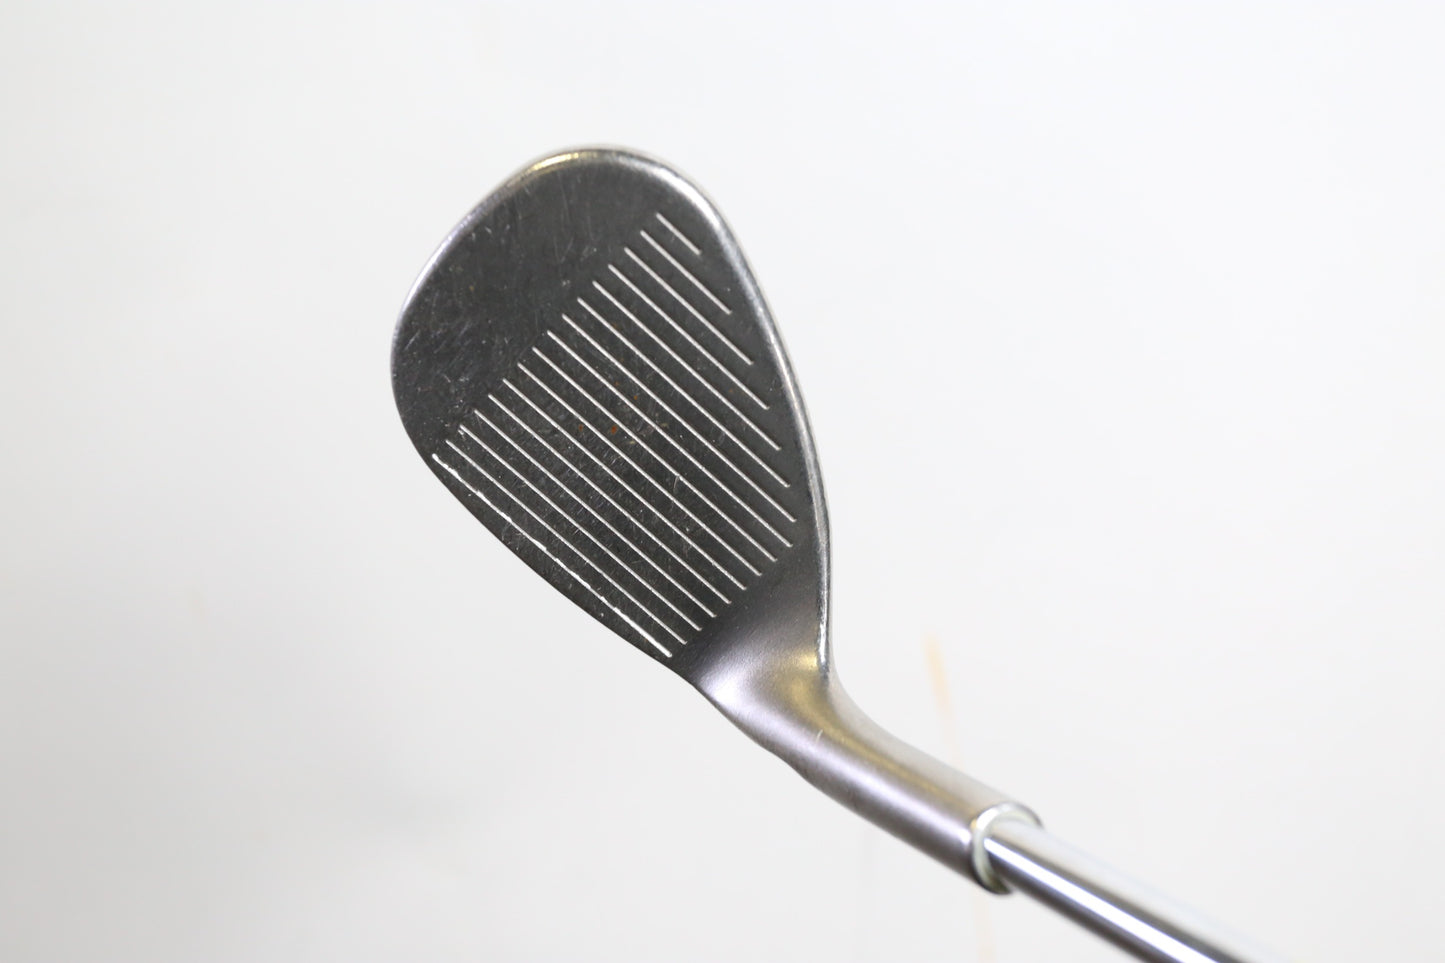 Used Ping M/B Sand Wedge - Right-Handed - 56 Degrees - Stiff Flex-Next Round